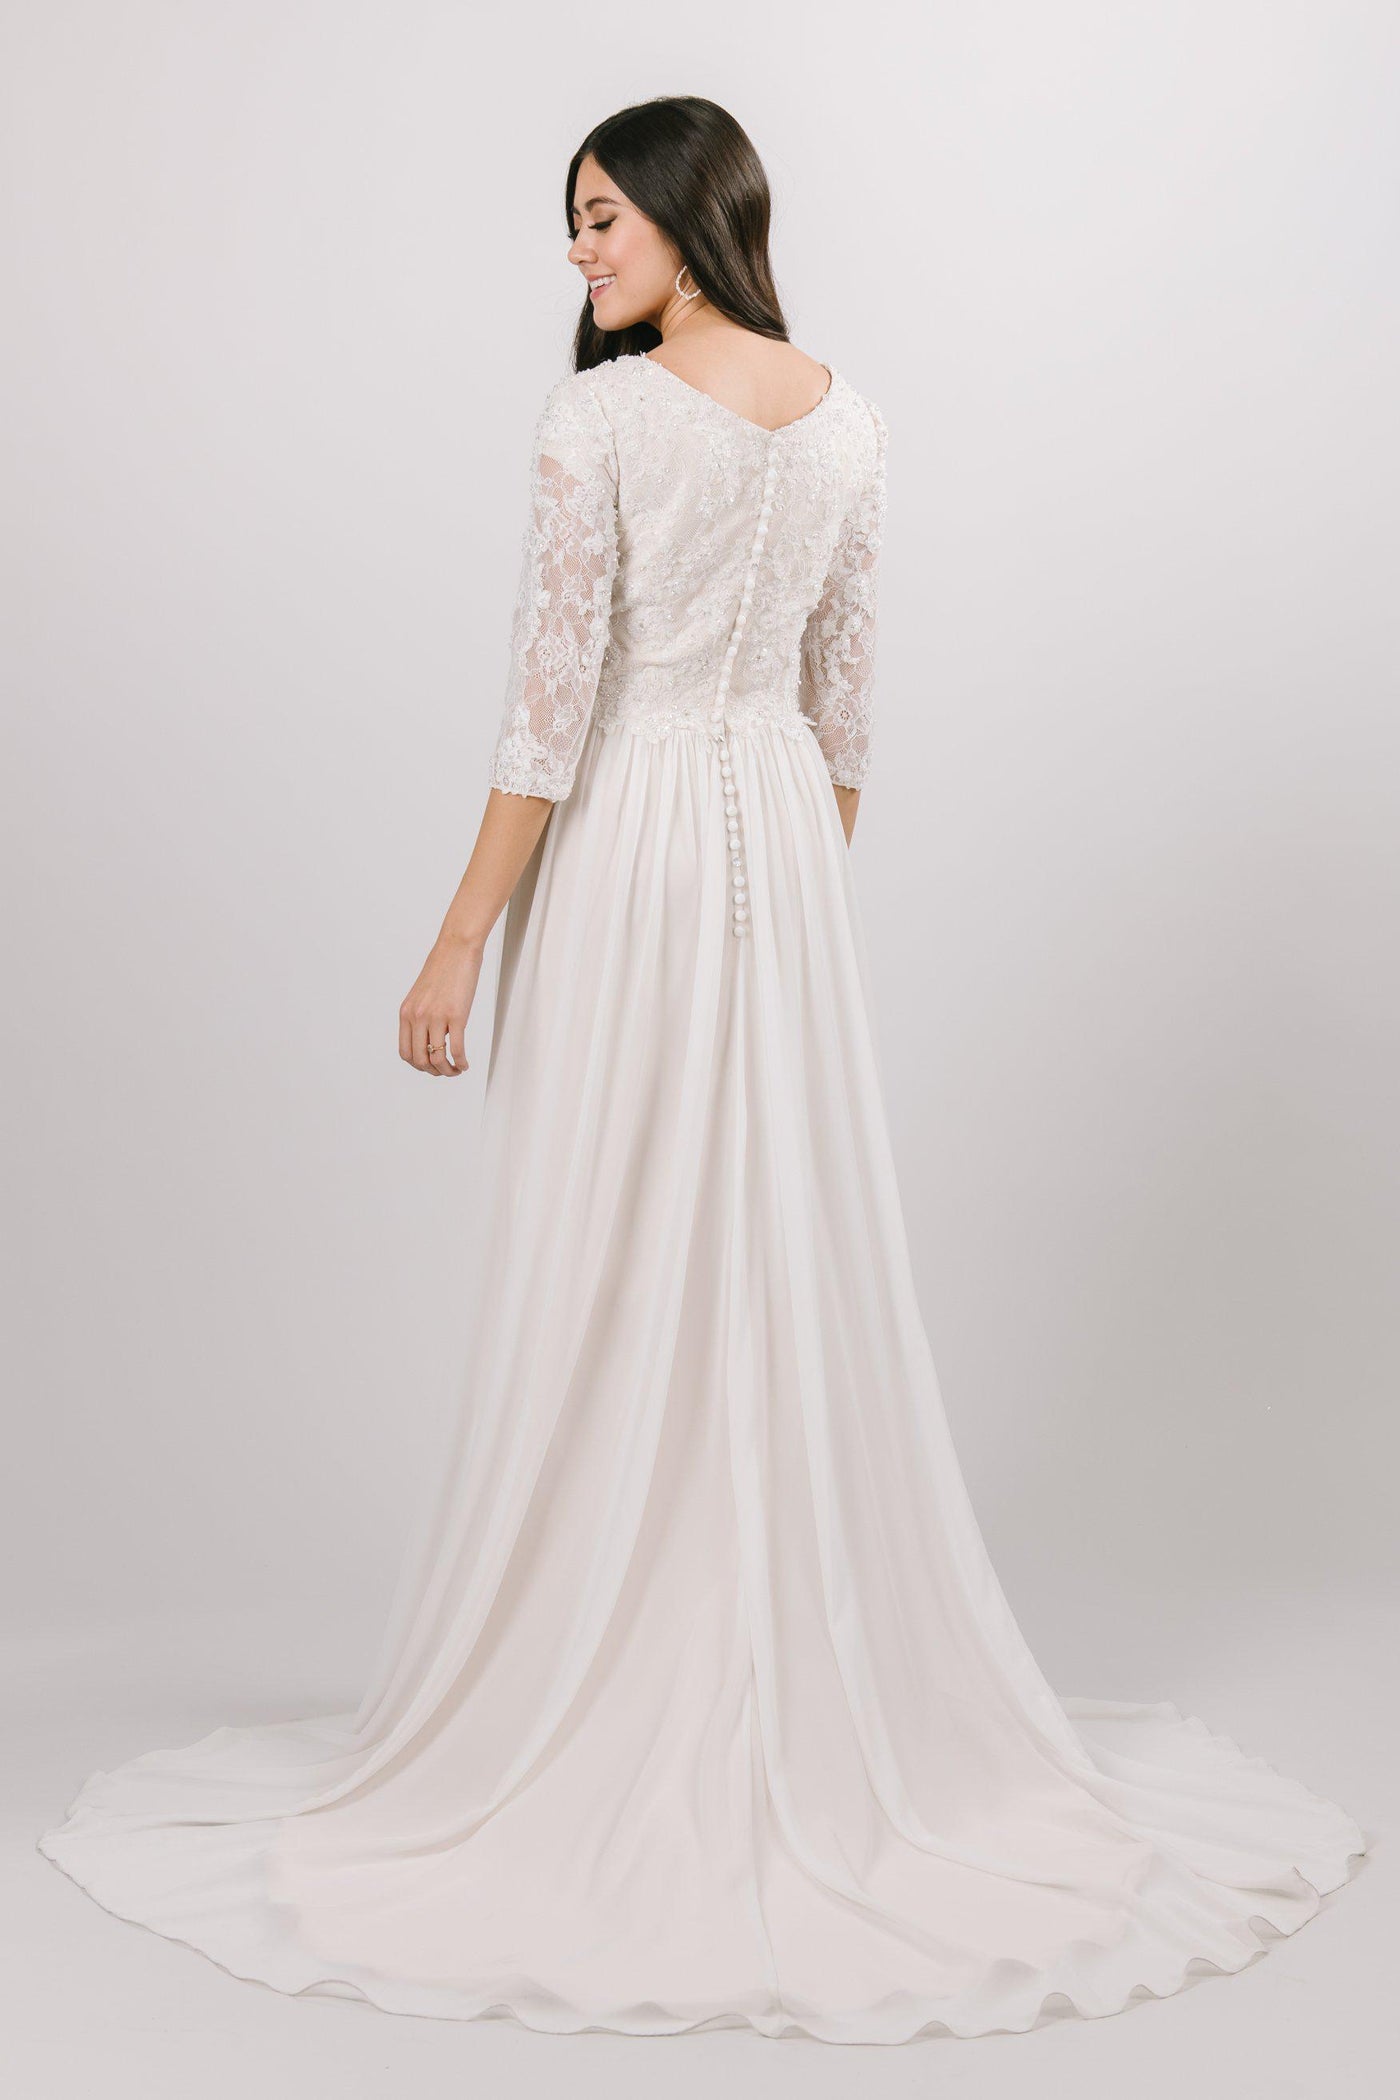 Boho chic wedding gown, style Quentin, is part of the Wedding Collection of LatterDayBride, a Salt Lake City bridal store.